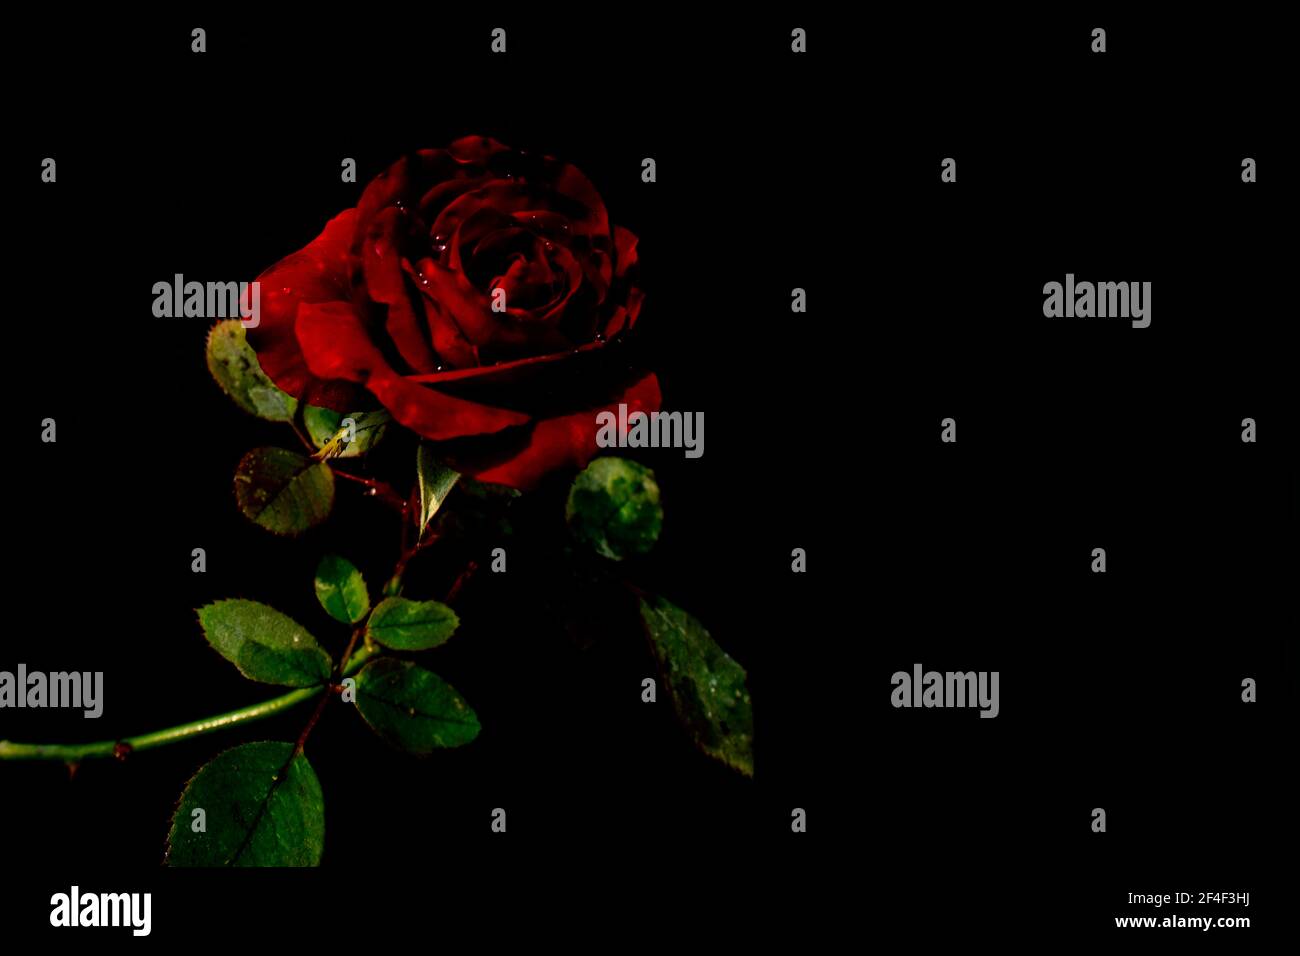 red rose flower on black background Stock Photo